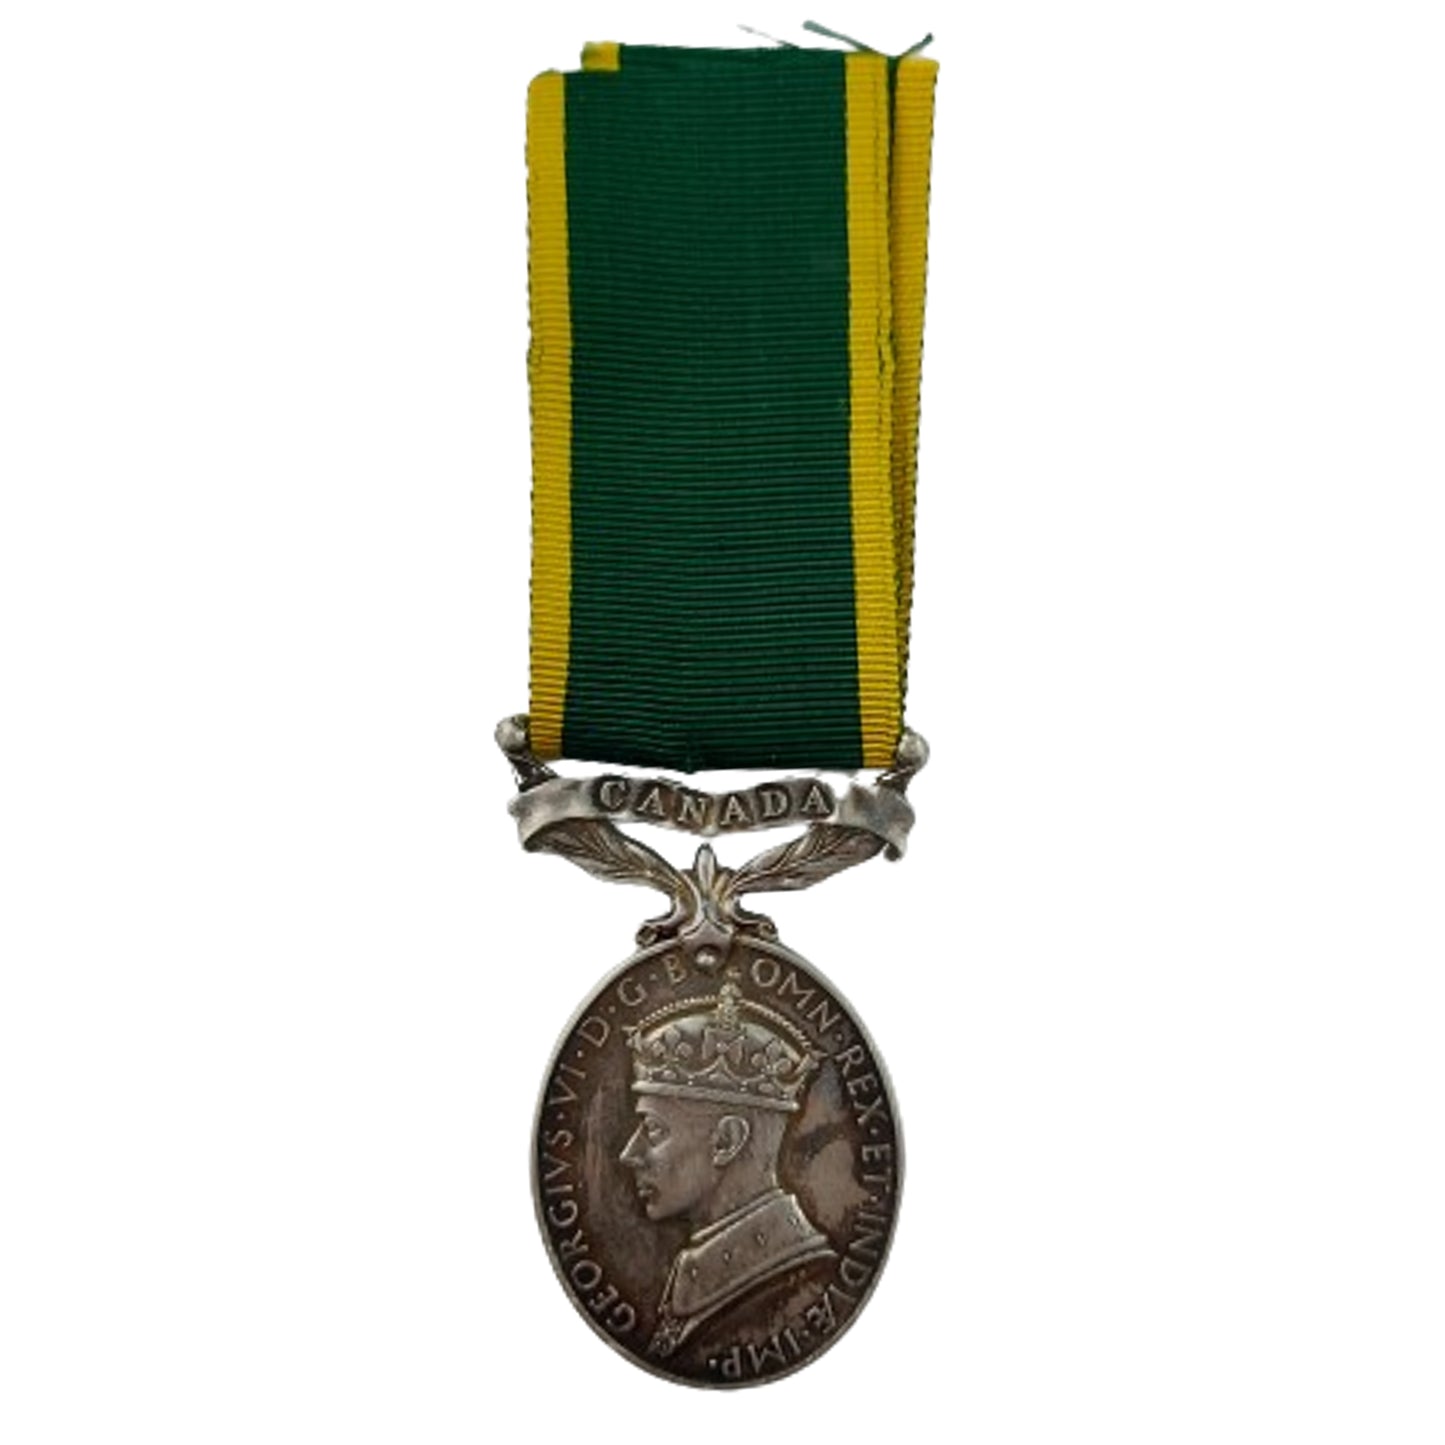 WW2 Canadian Efficiency Medal RCIC Royal Canadian Intelligence Corps